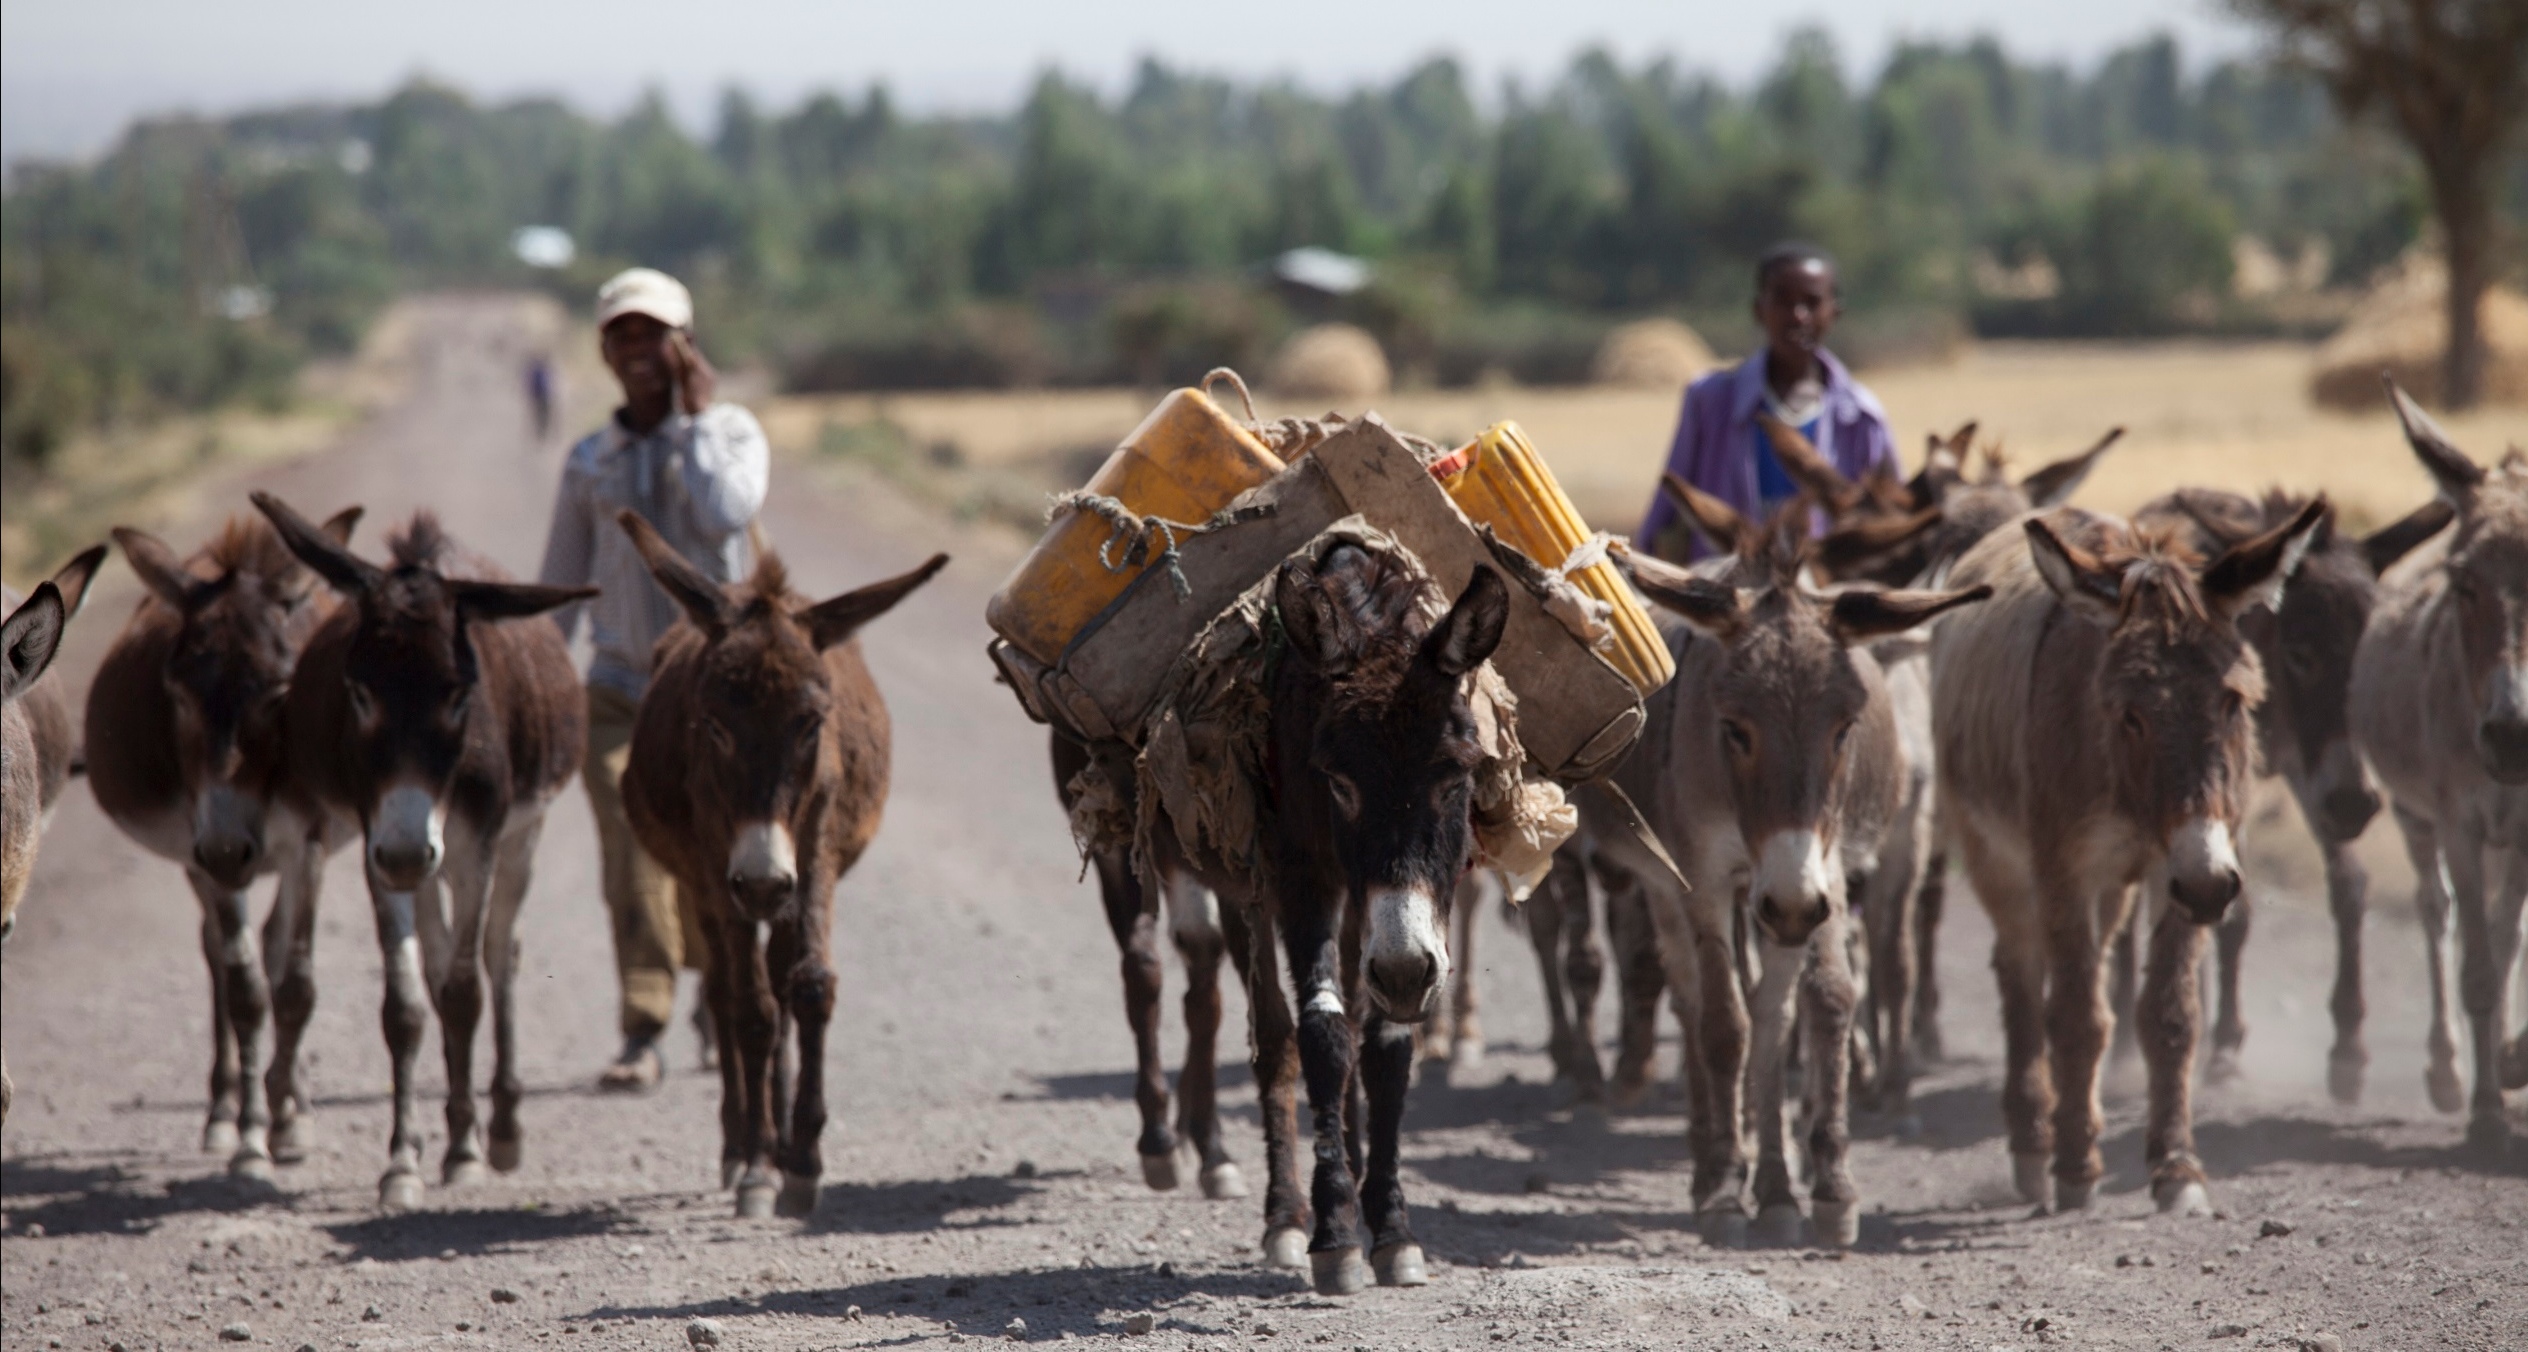 Nigeria’s stand against the donkey skin trade wins praise from leading international animal welfare charity